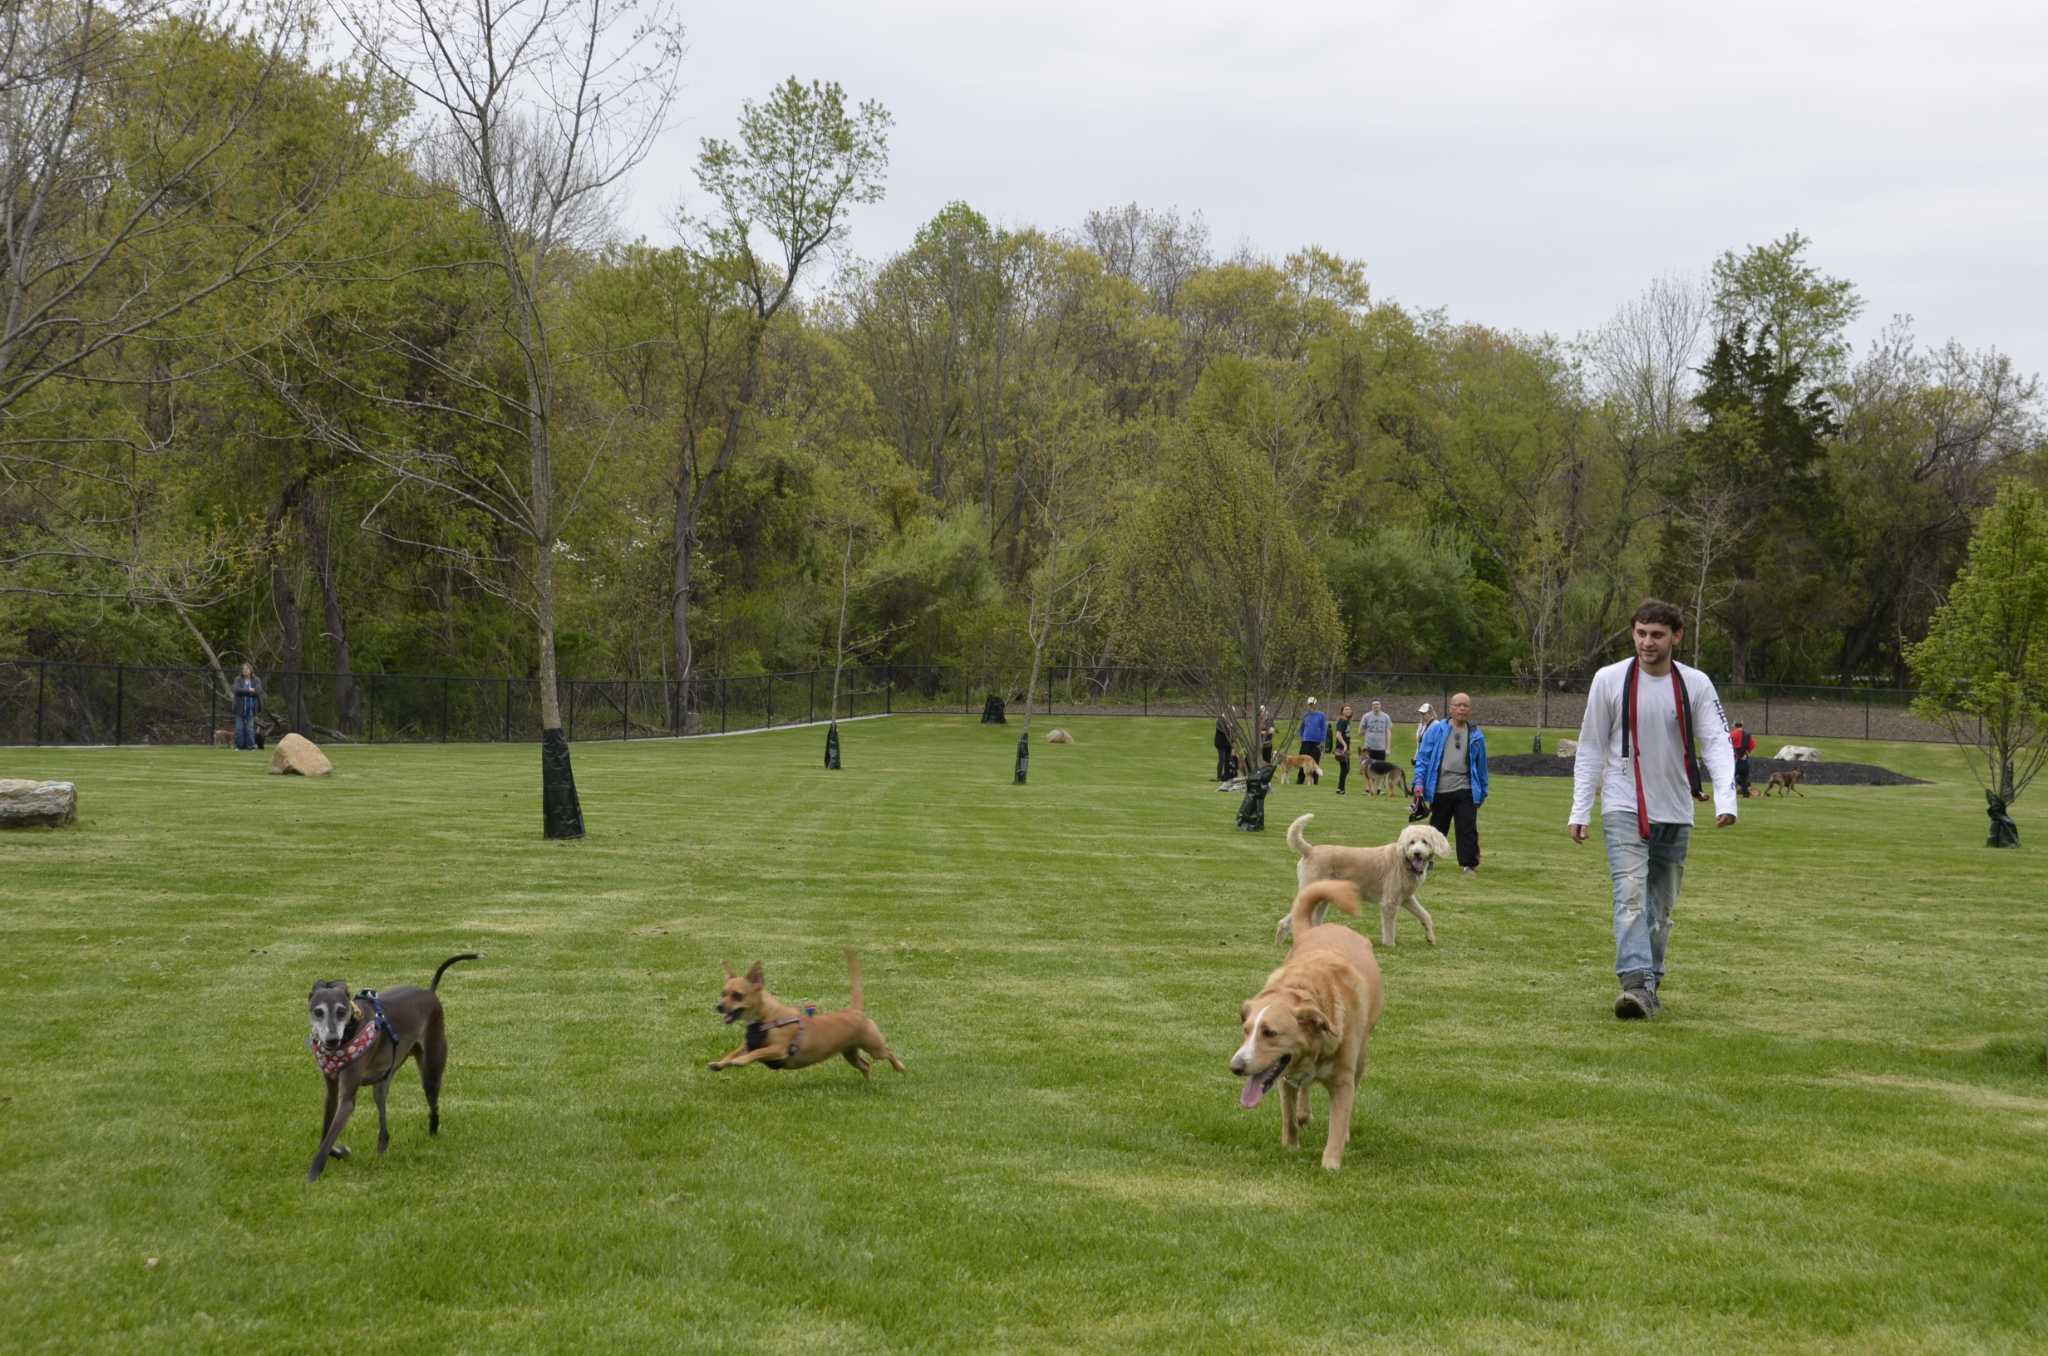 Pet owners rave about Milford’s expanded dog park - Milford Mirror